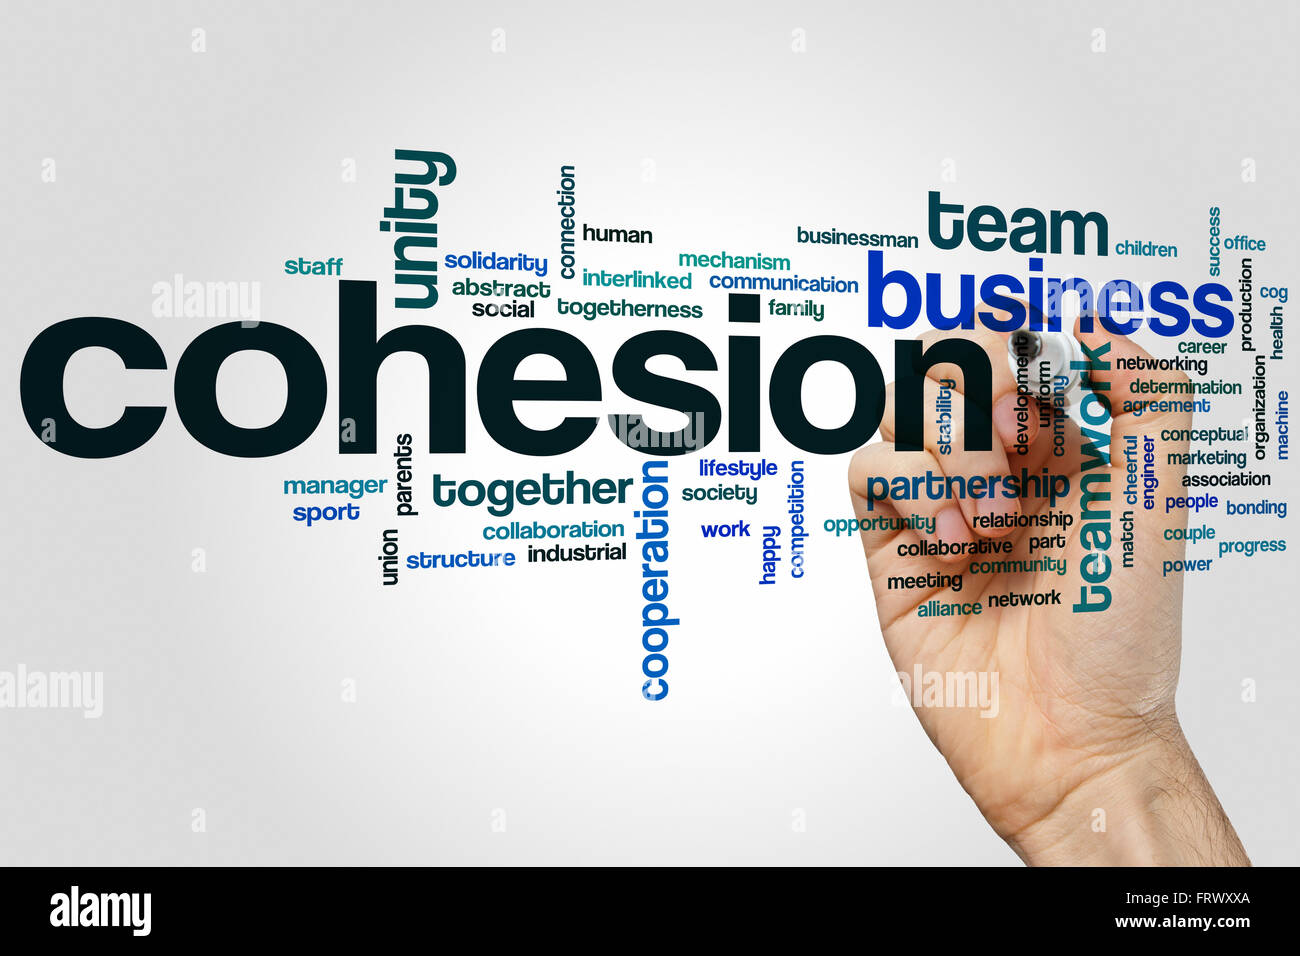 Cohesion concept word cloud background Stock Photo